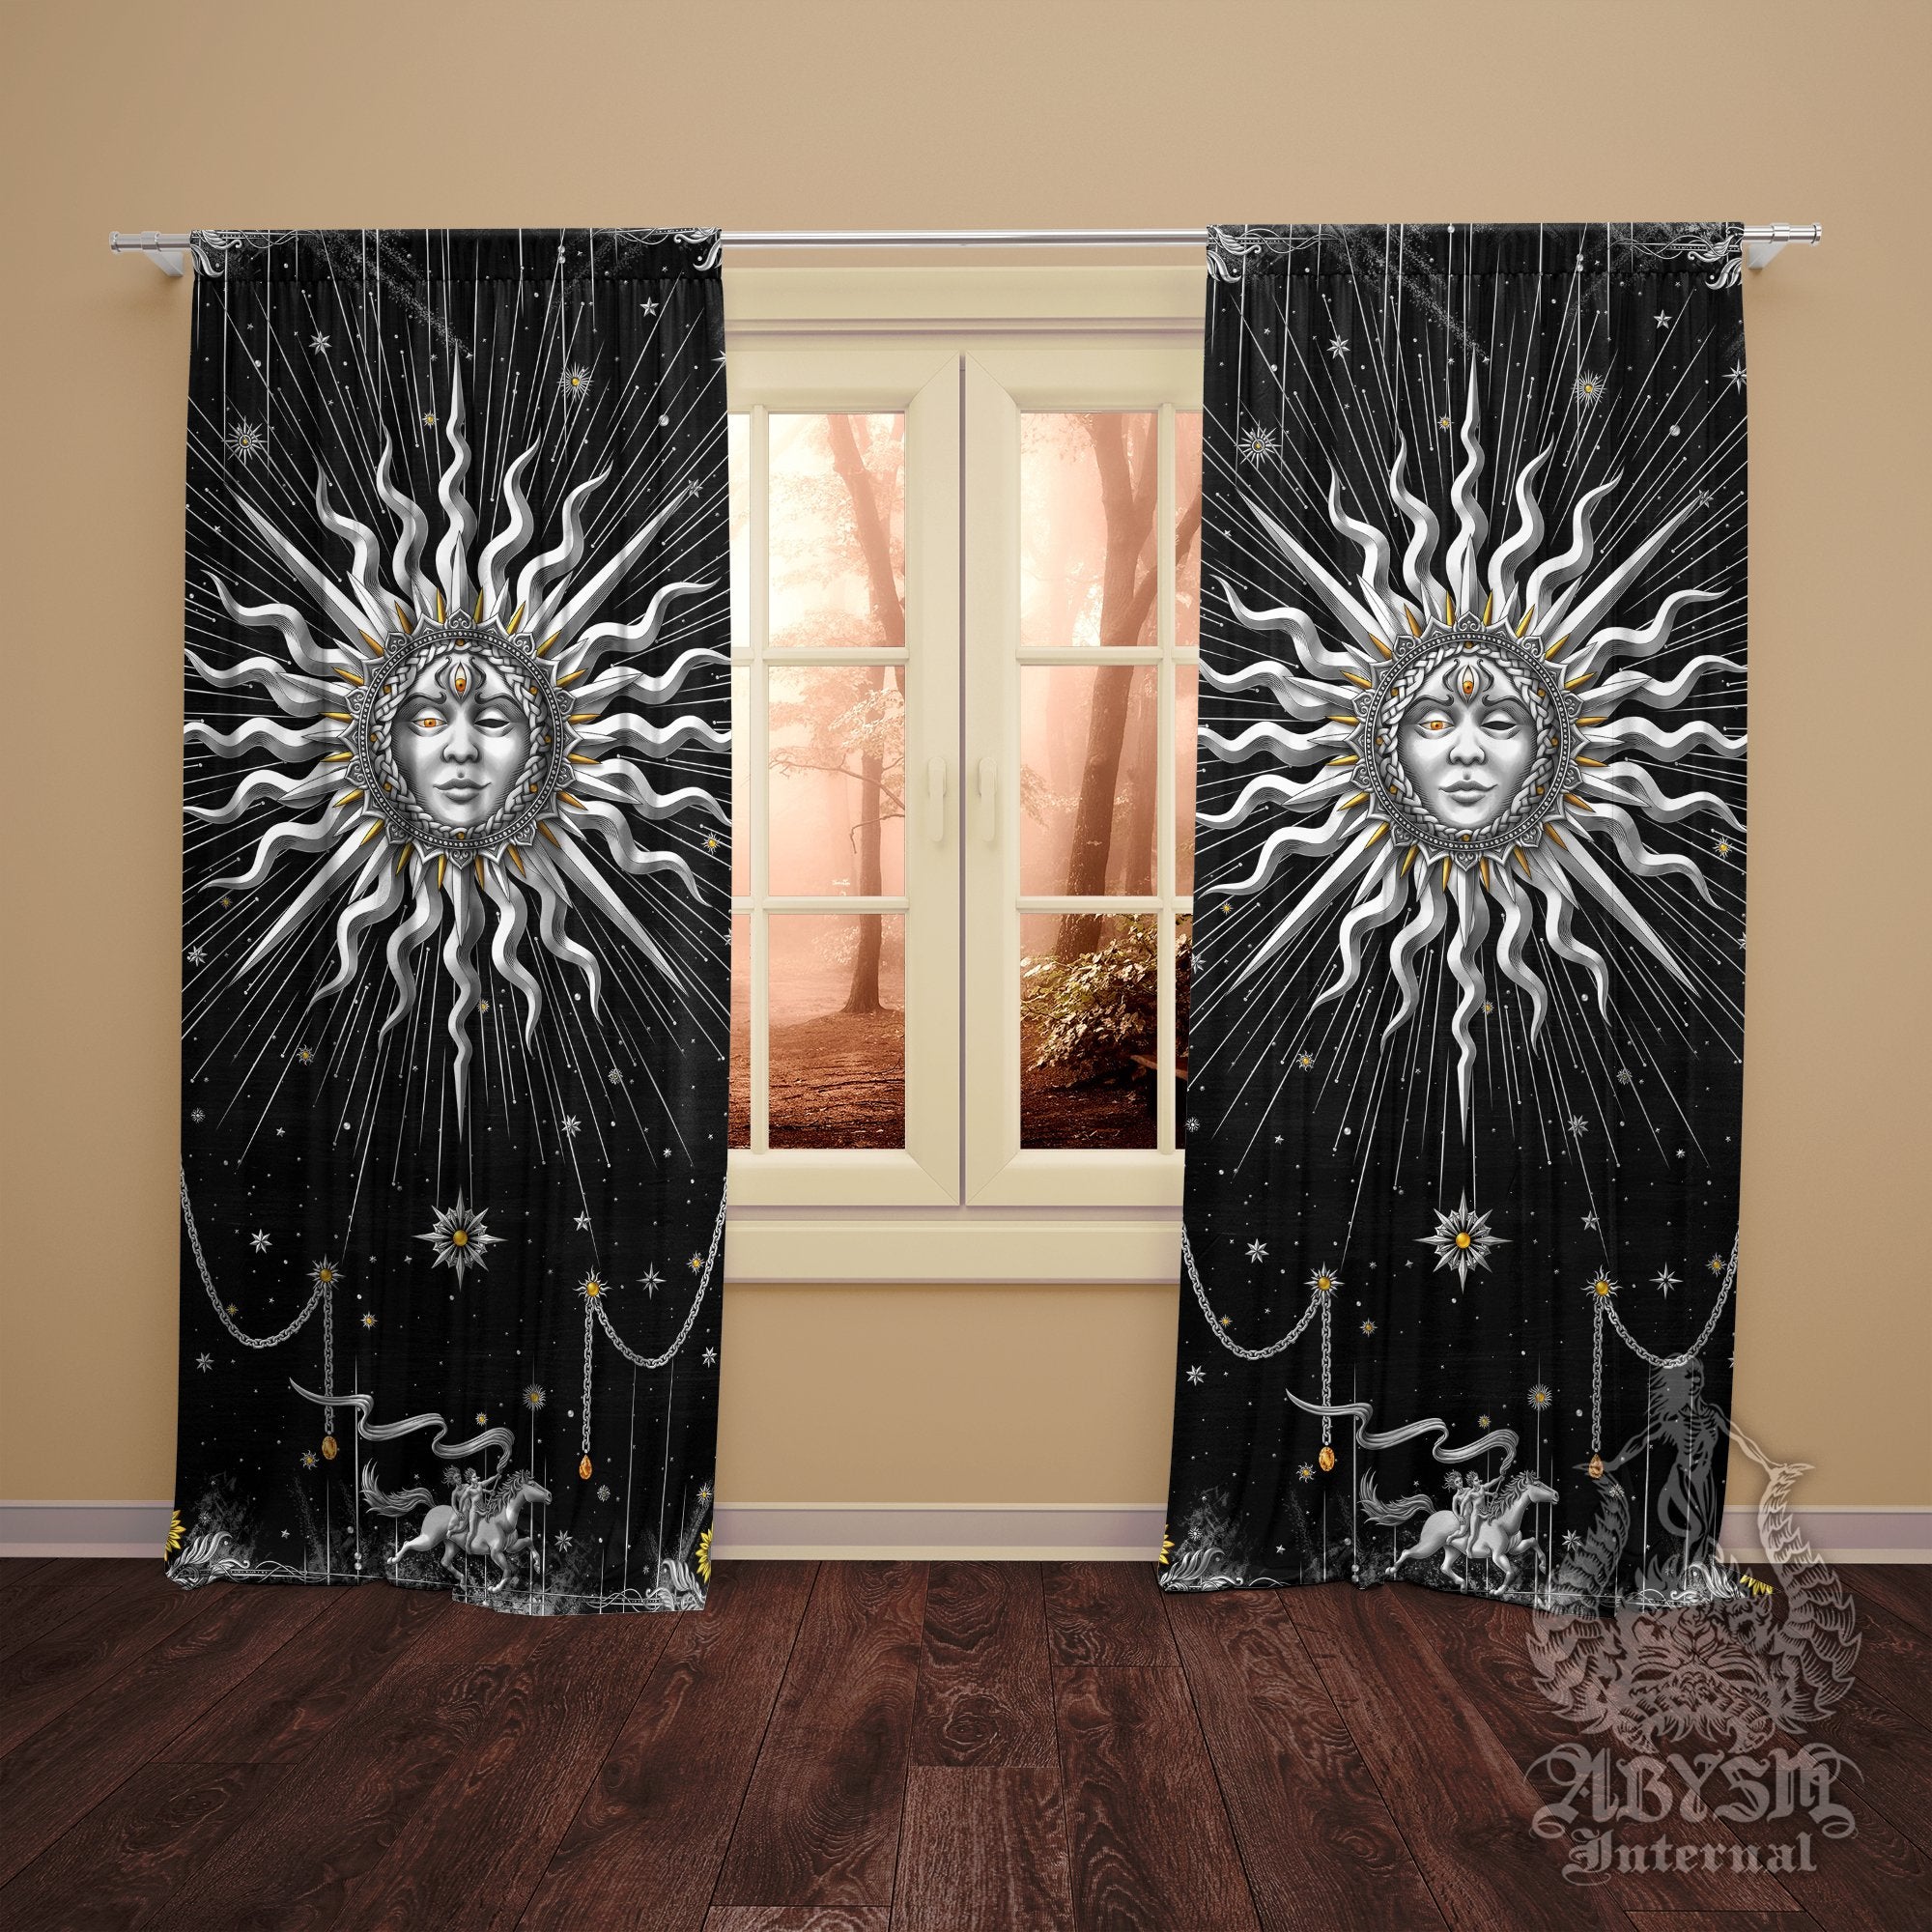 Silver Sun Curtains, 50x84' Printed Window Panels, Indie and Boho Home Decor, Tarot Arcana, Esoteric Art Print - 7 Colors - Abysm Internal